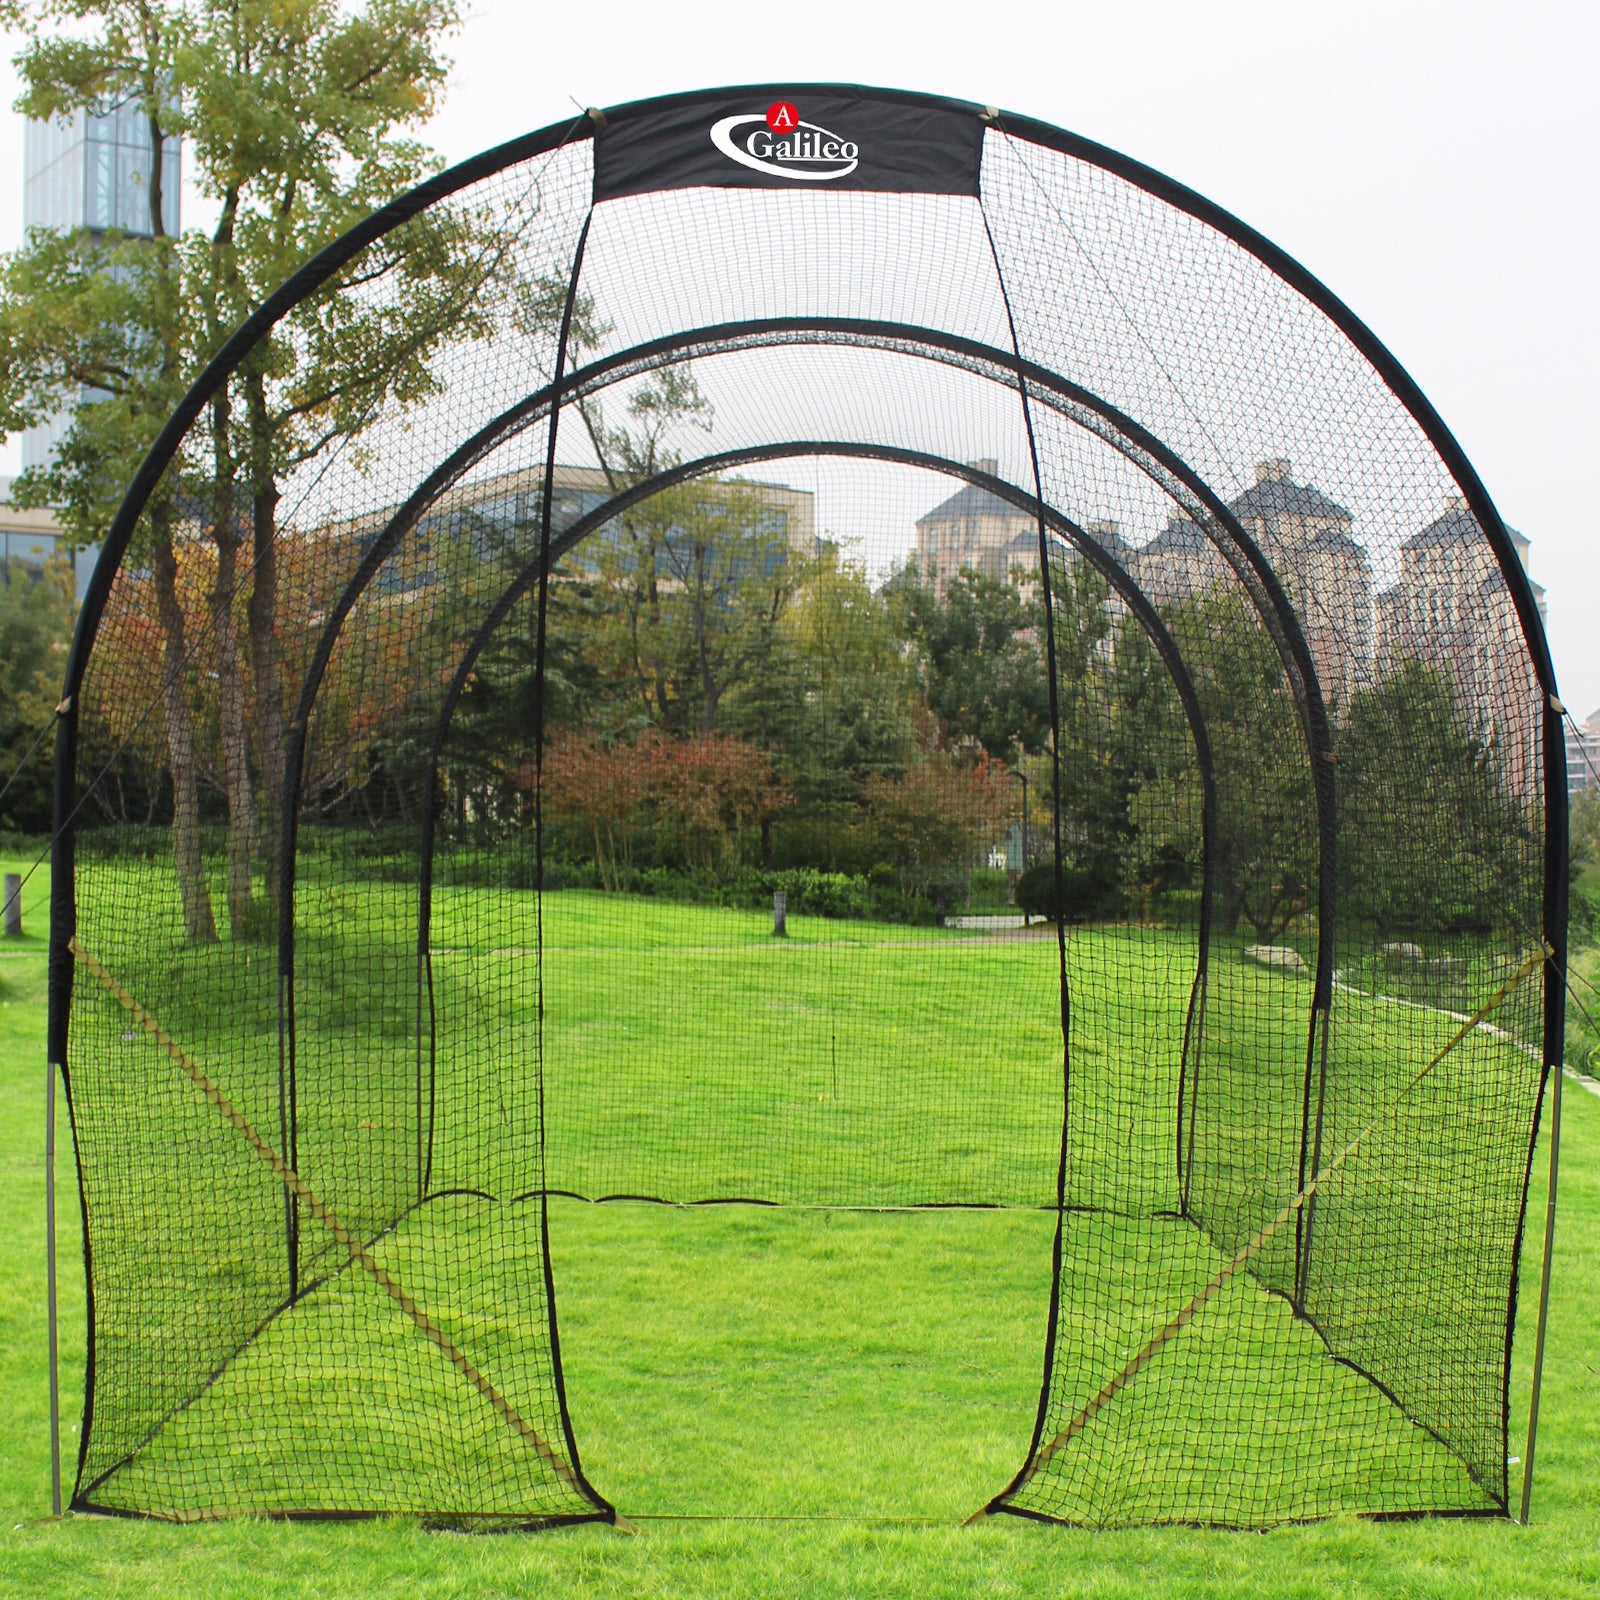 Galileo Baseball Softball Batting Cage for Kids Pitching Hitting Practice,Portable Heavy Duty Freestanding Large Batting Cages with Steel Frame and Net,Home Backyard Outdoor Use